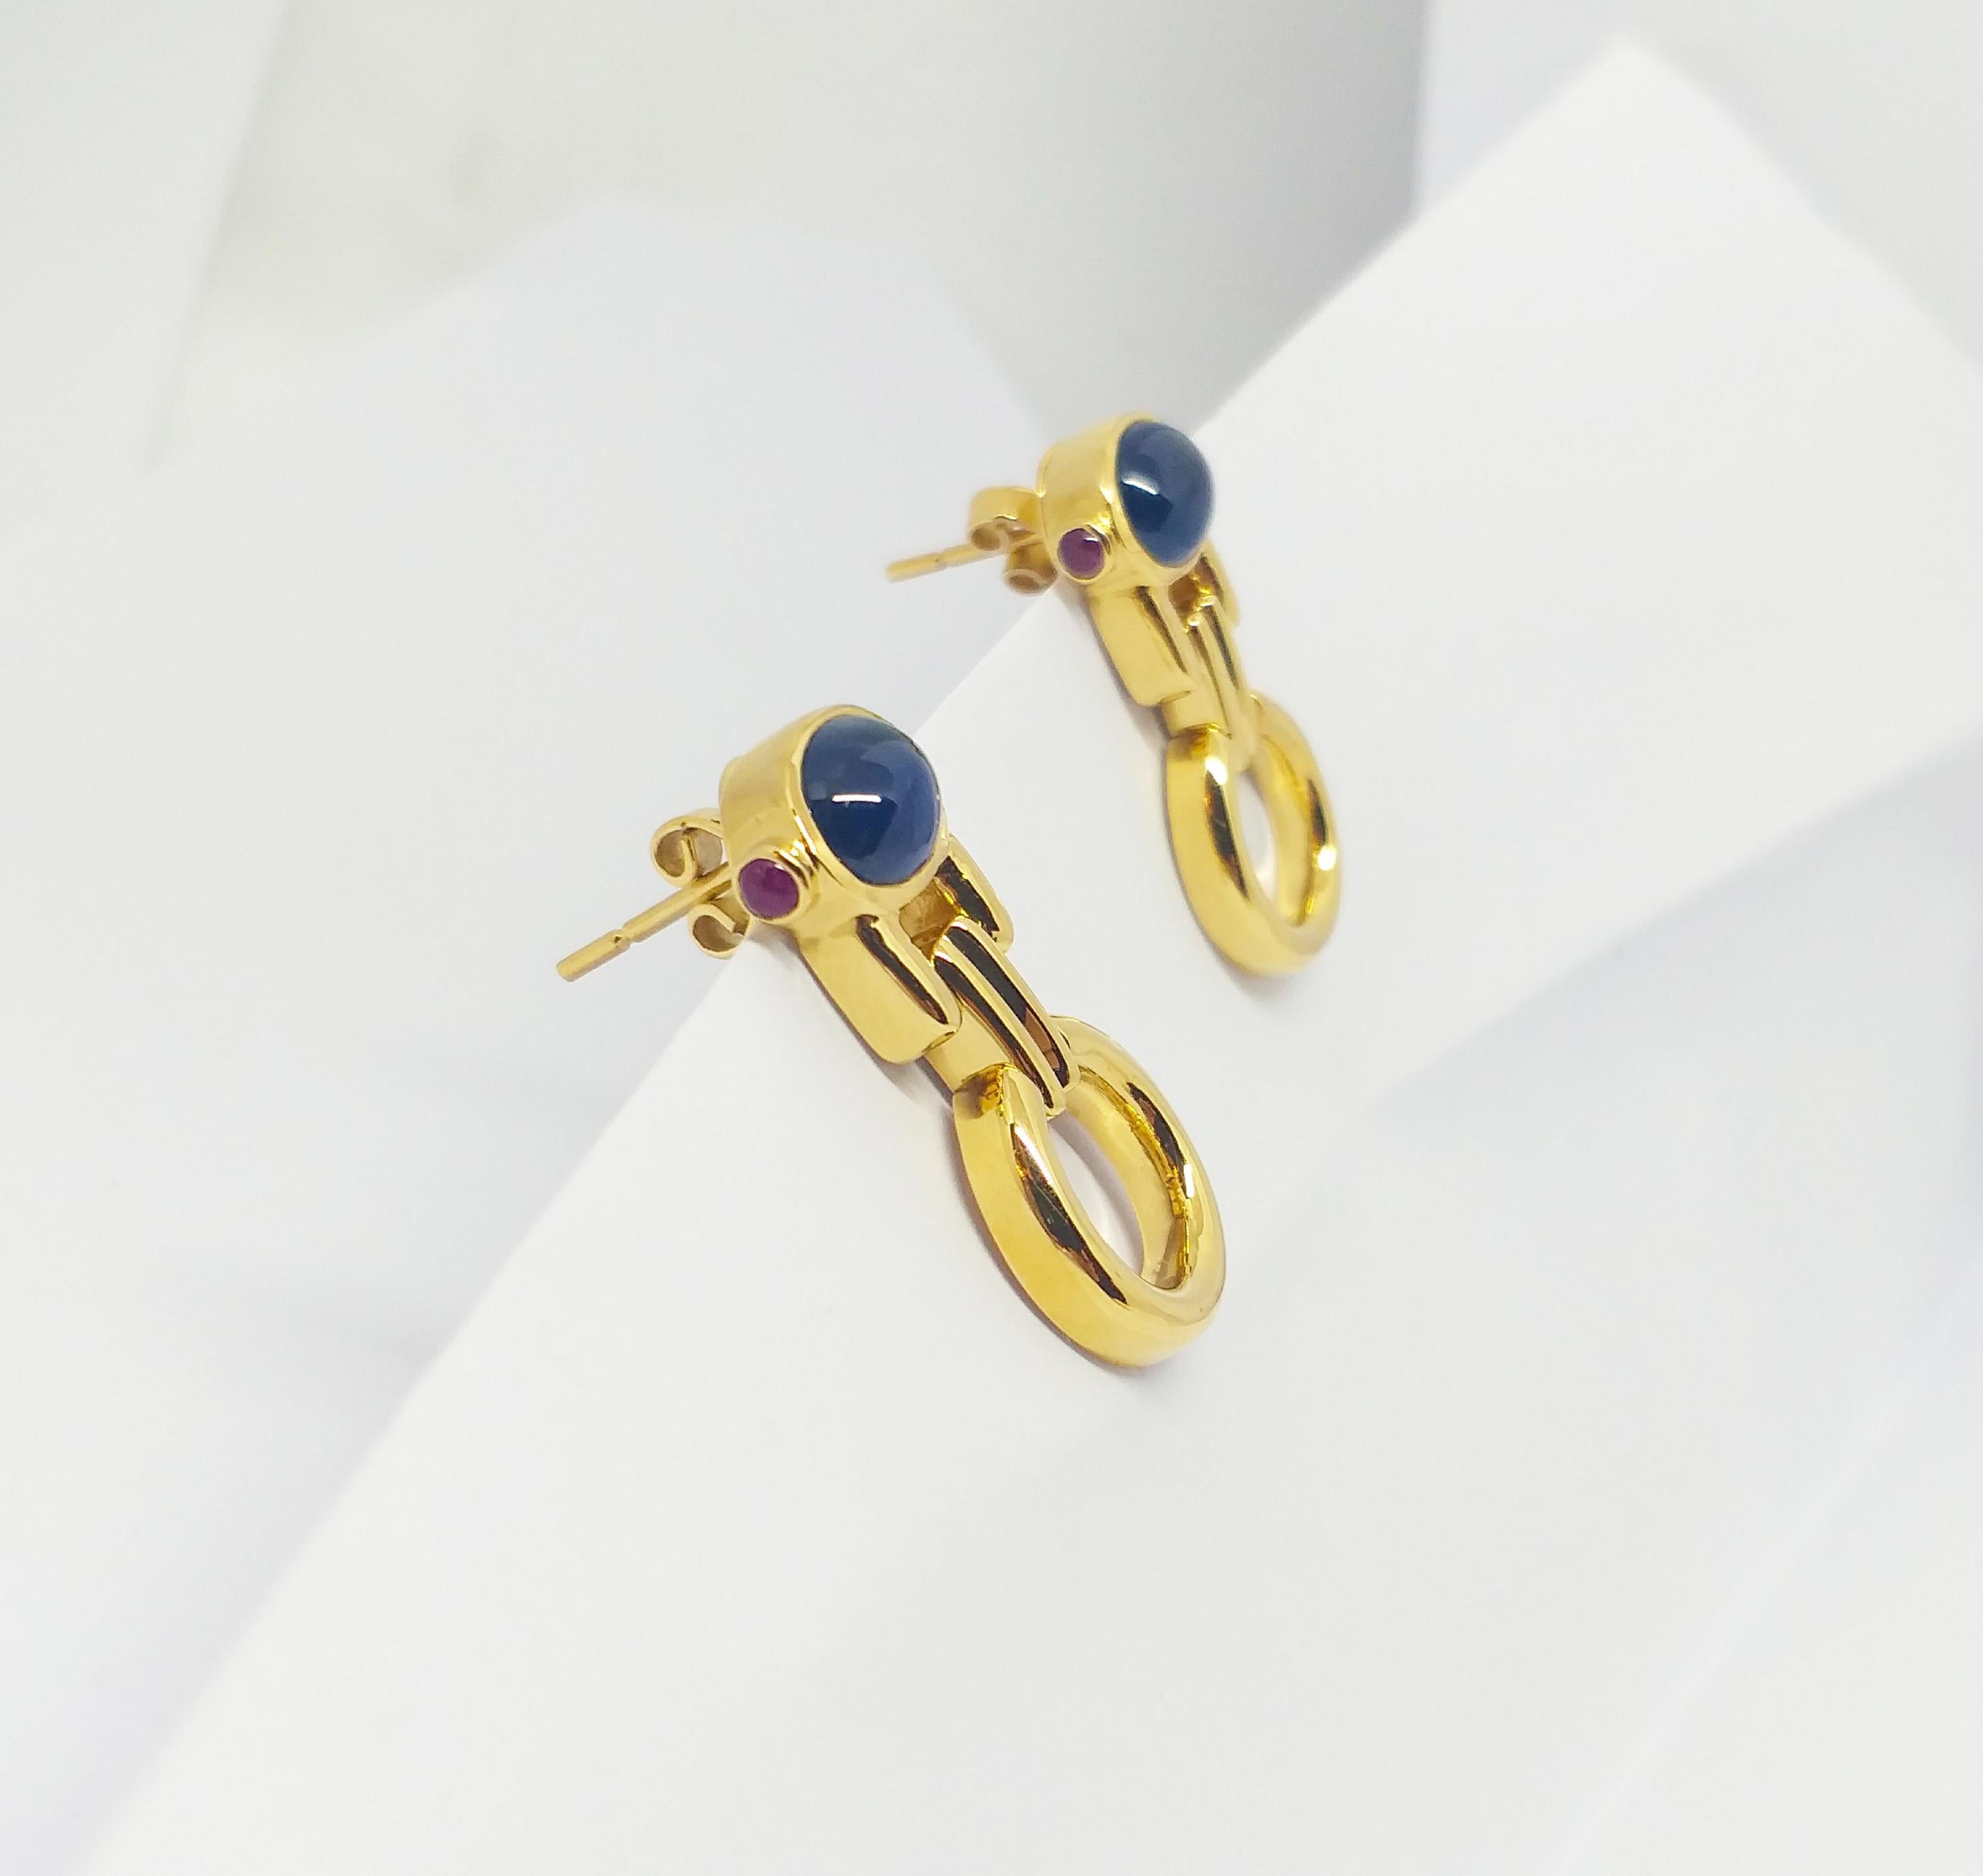 Cabochon Blue Sapphire with Cabochon Ruby Earrings set in 18K Gold Settings For Sale 8